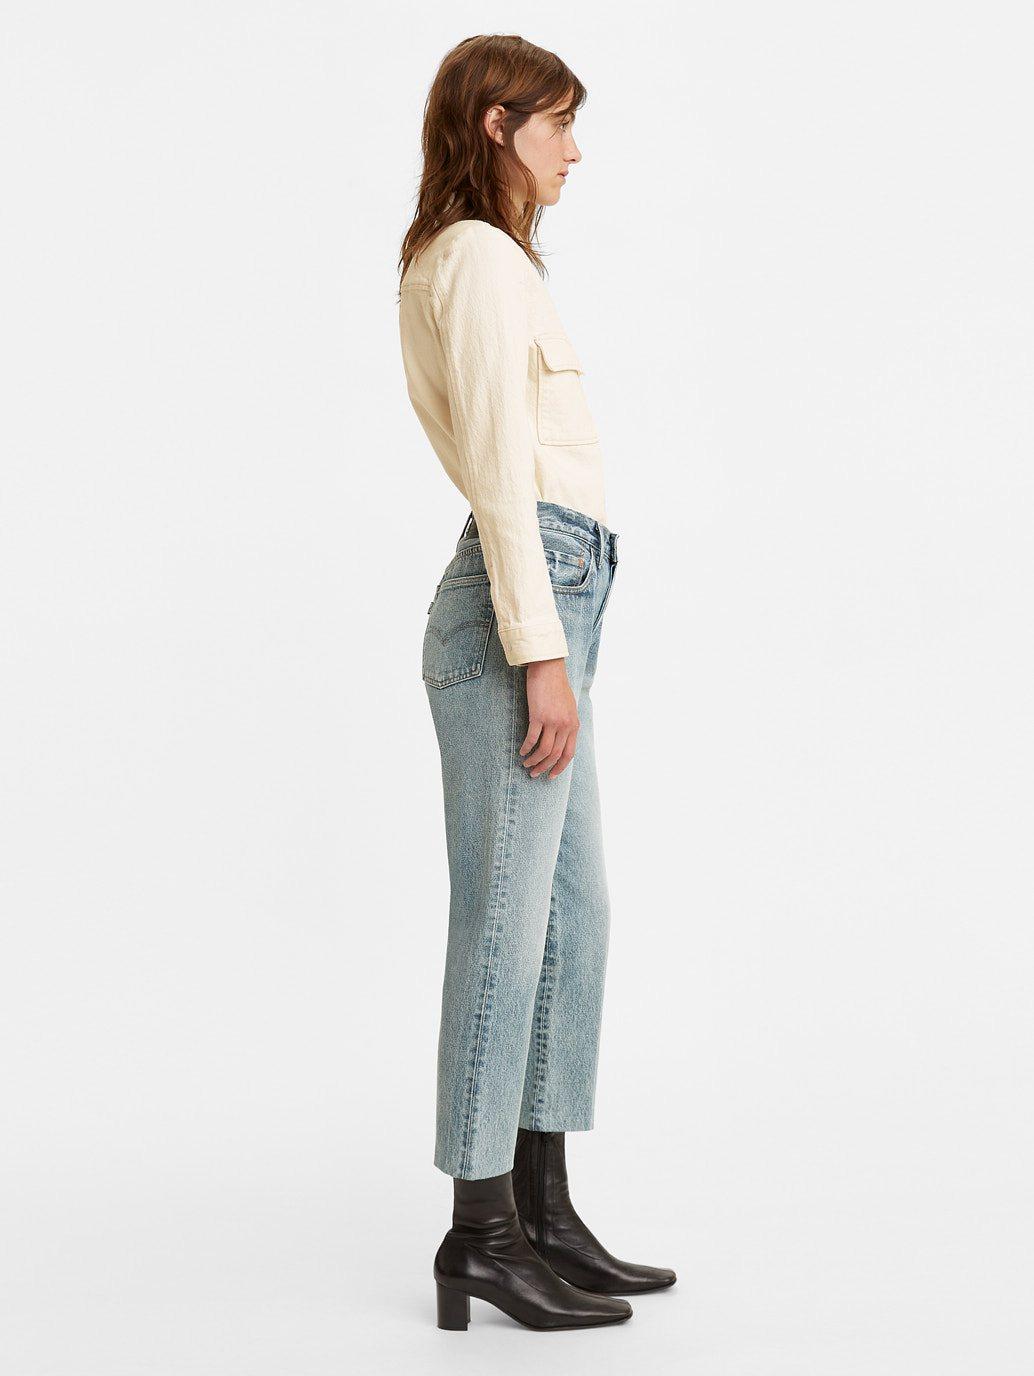 Buy Levi's® Made & Crafted® Women's 501® Original Selvedge Cropped Jeans |  Levi's® HK Official Onlin